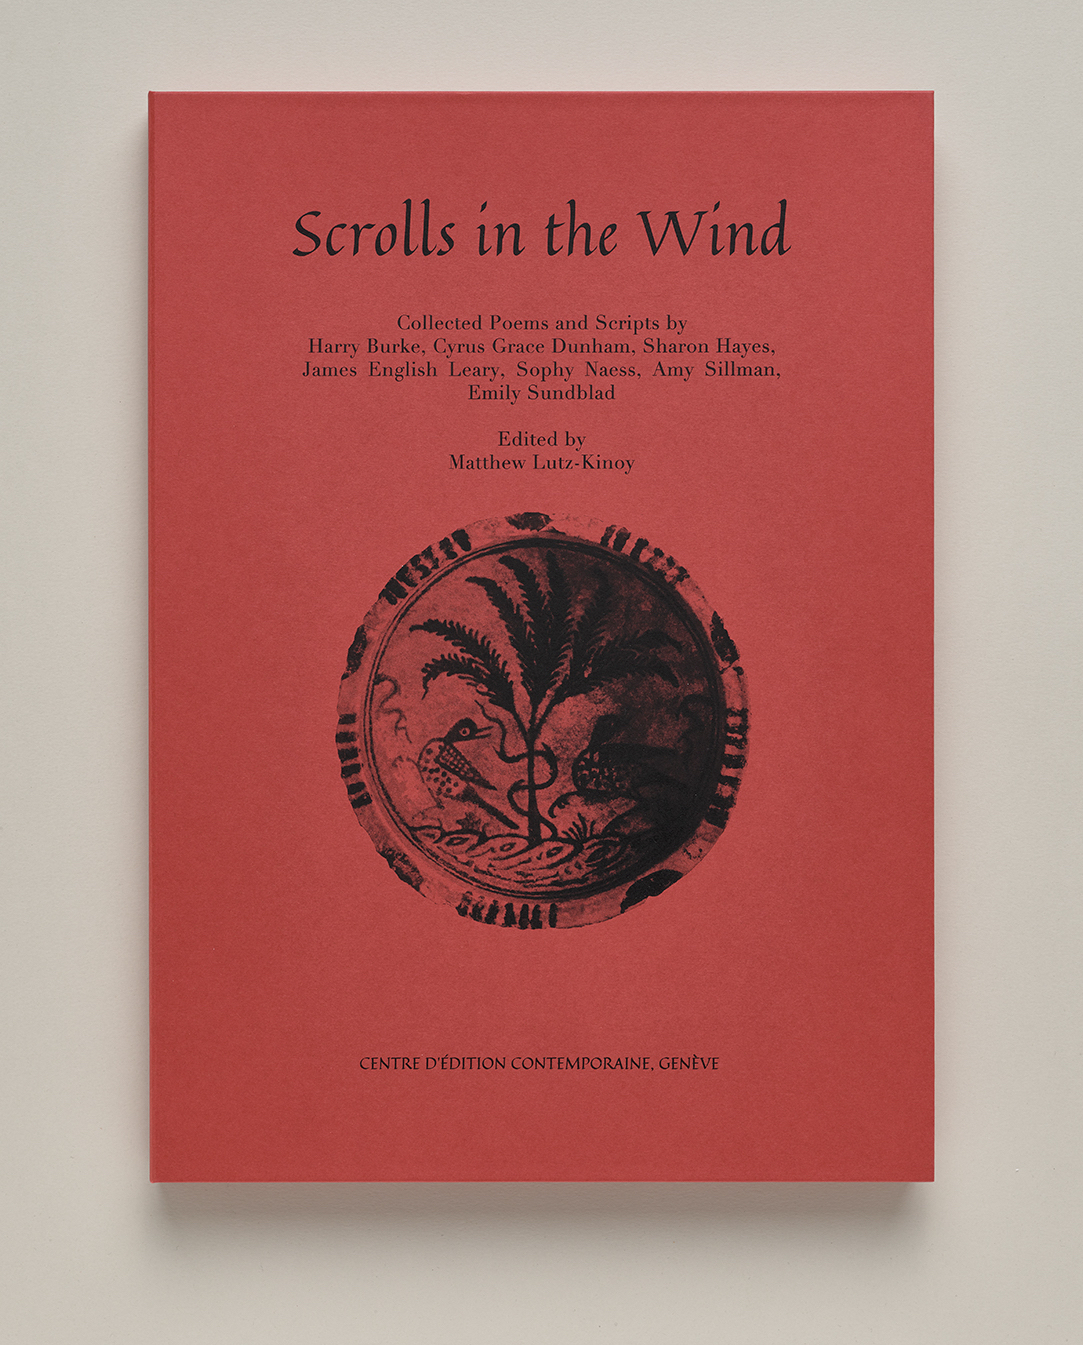 Matthew Lutz-KinoyScrolls in the WindA collection of scripts and poems by Harry Burke, Cyrus Grace Dunham, Sharon Hayes, James English Leary, Sophy Naess, Amy Sillman and Emily Sundblad. Edited by Matthew Lutz-Kinoy